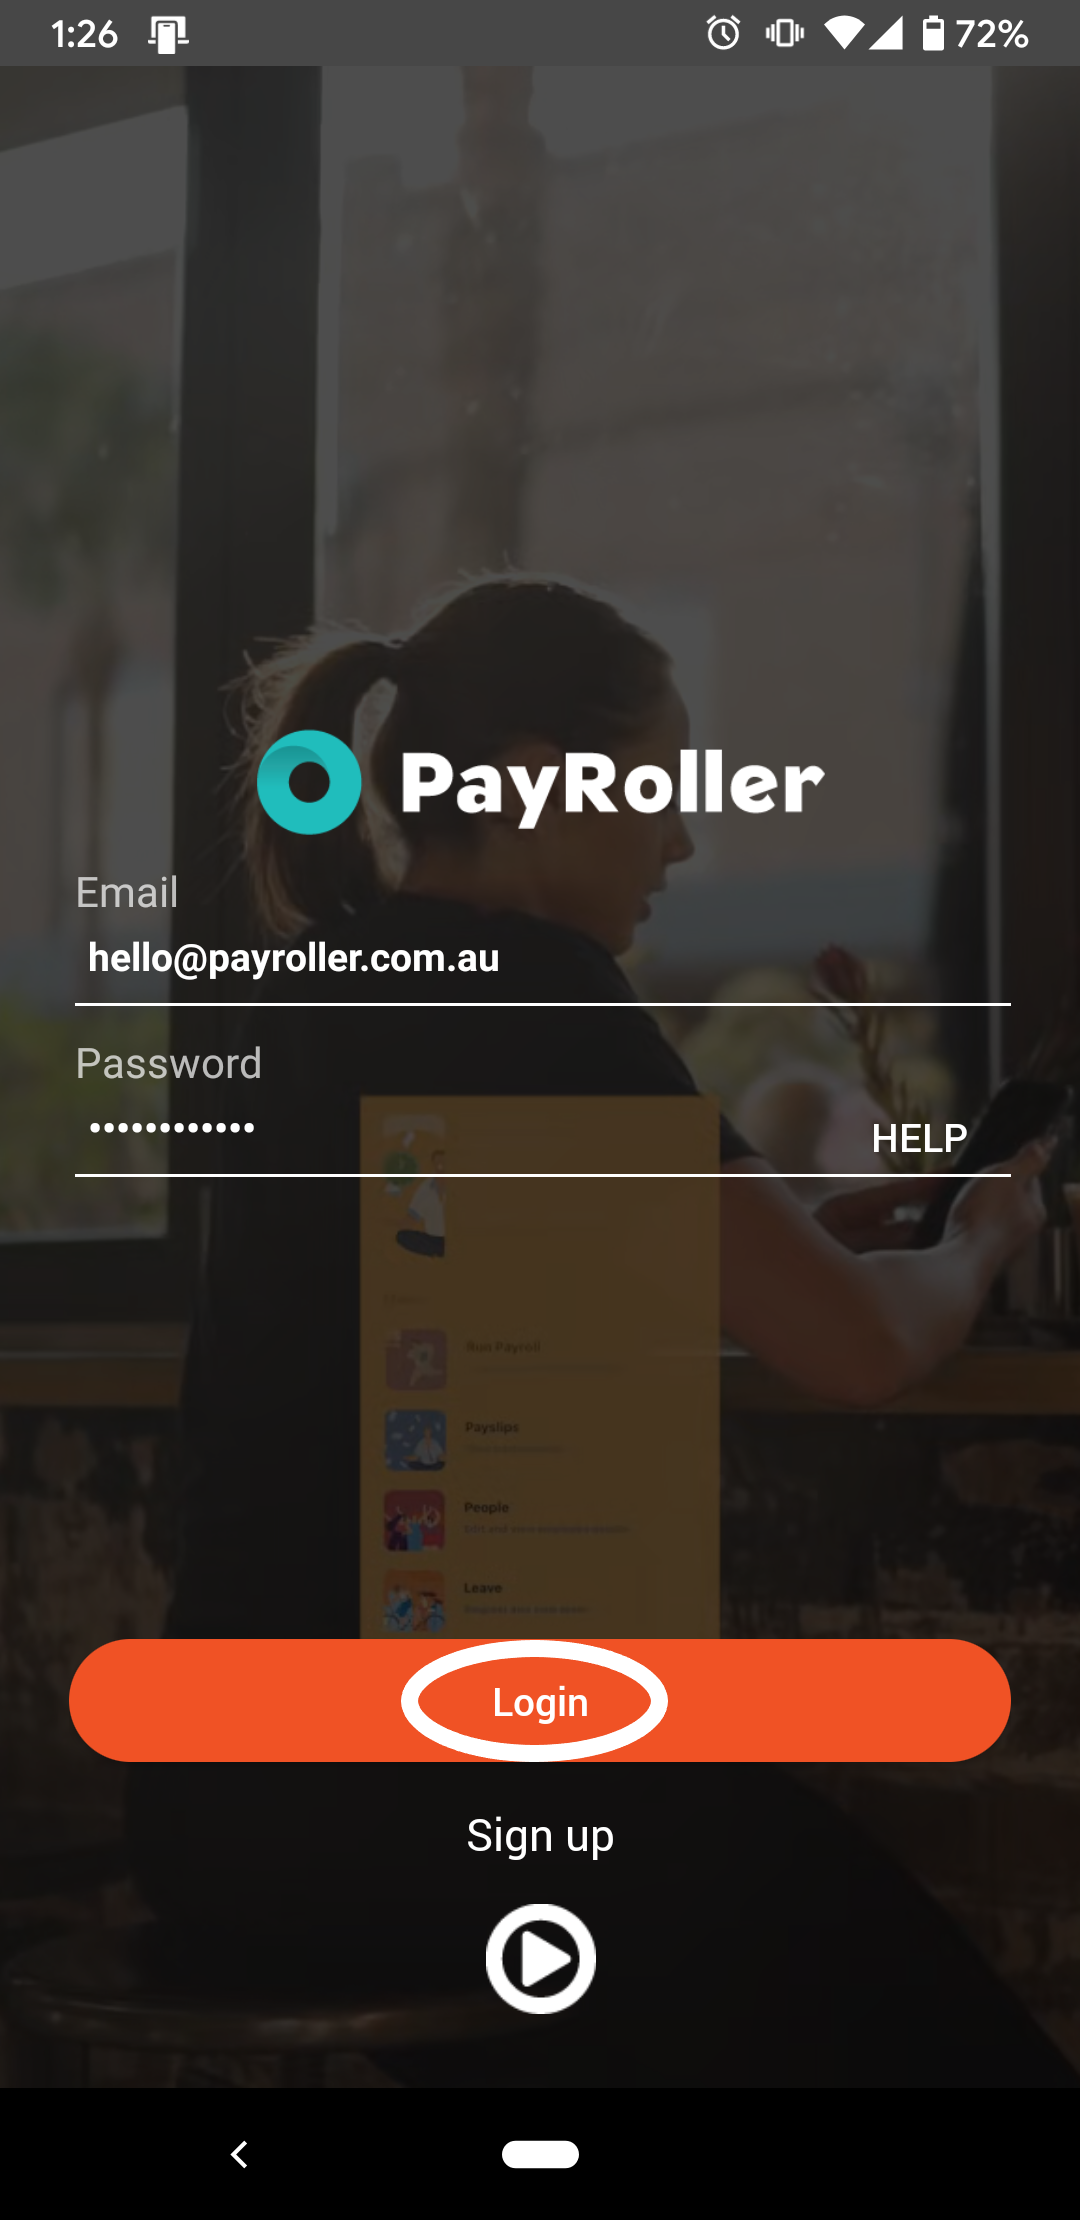 Payroller Mobile App - How to login to an existing account on the Payroller mobile app - 2